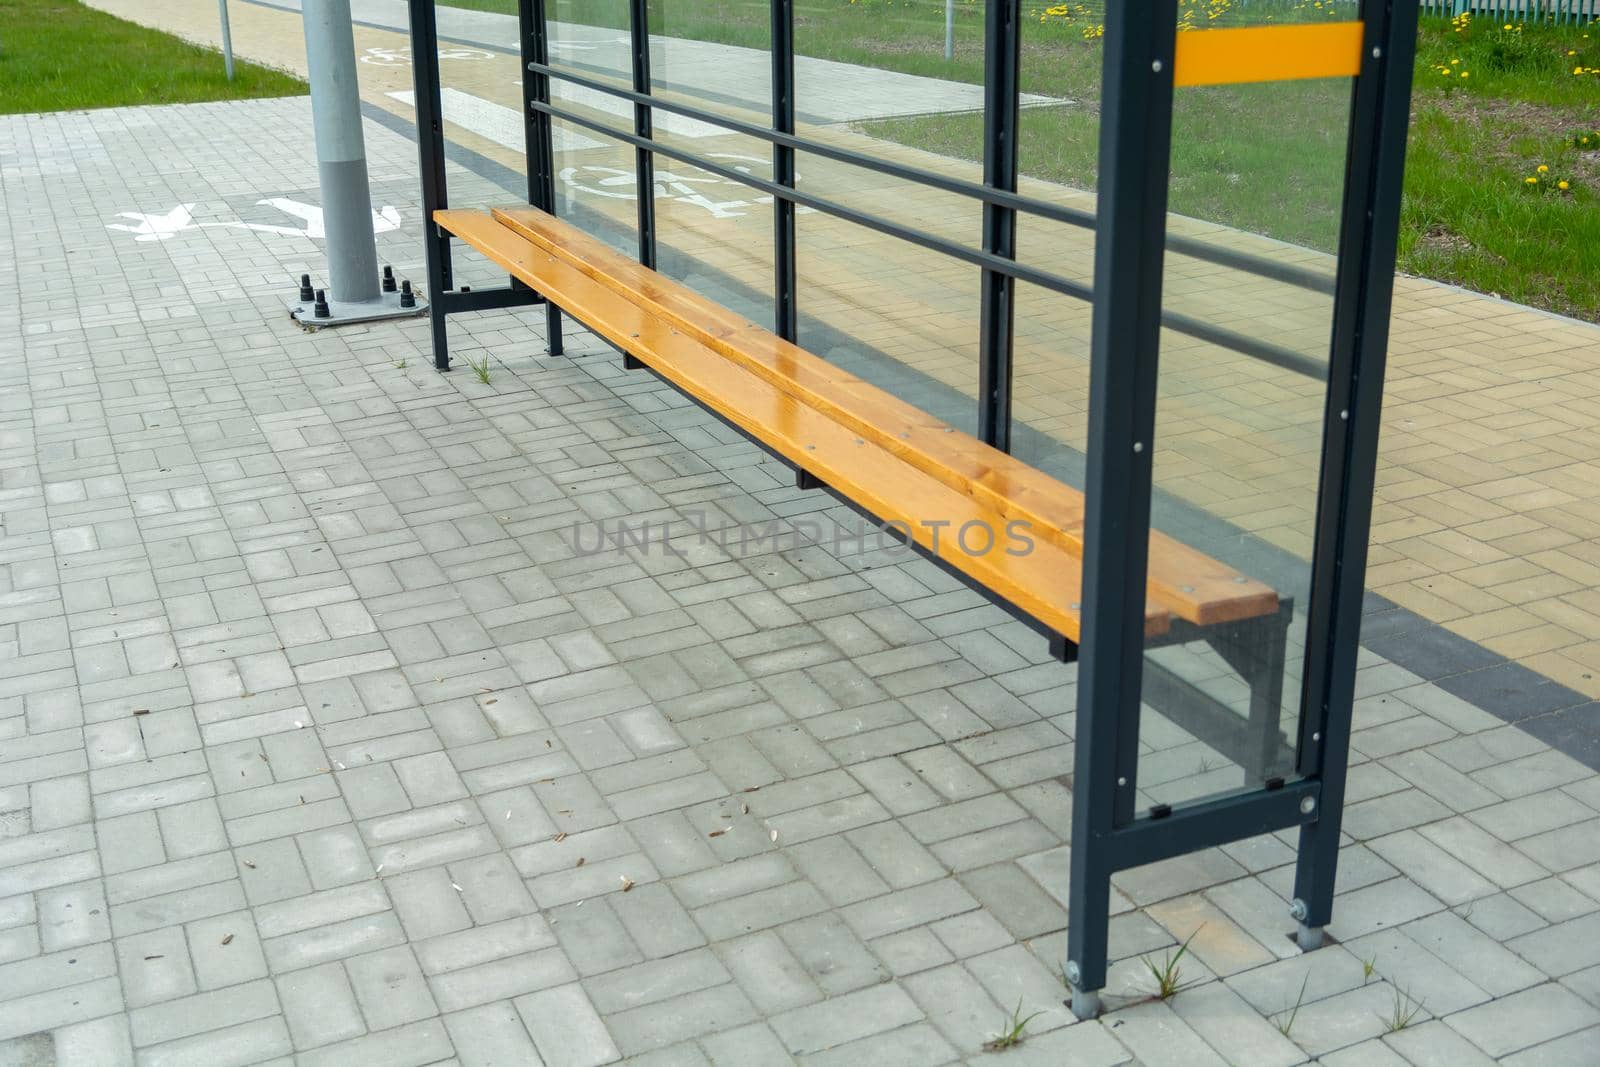 New glass shelter bus stop with wooden bench